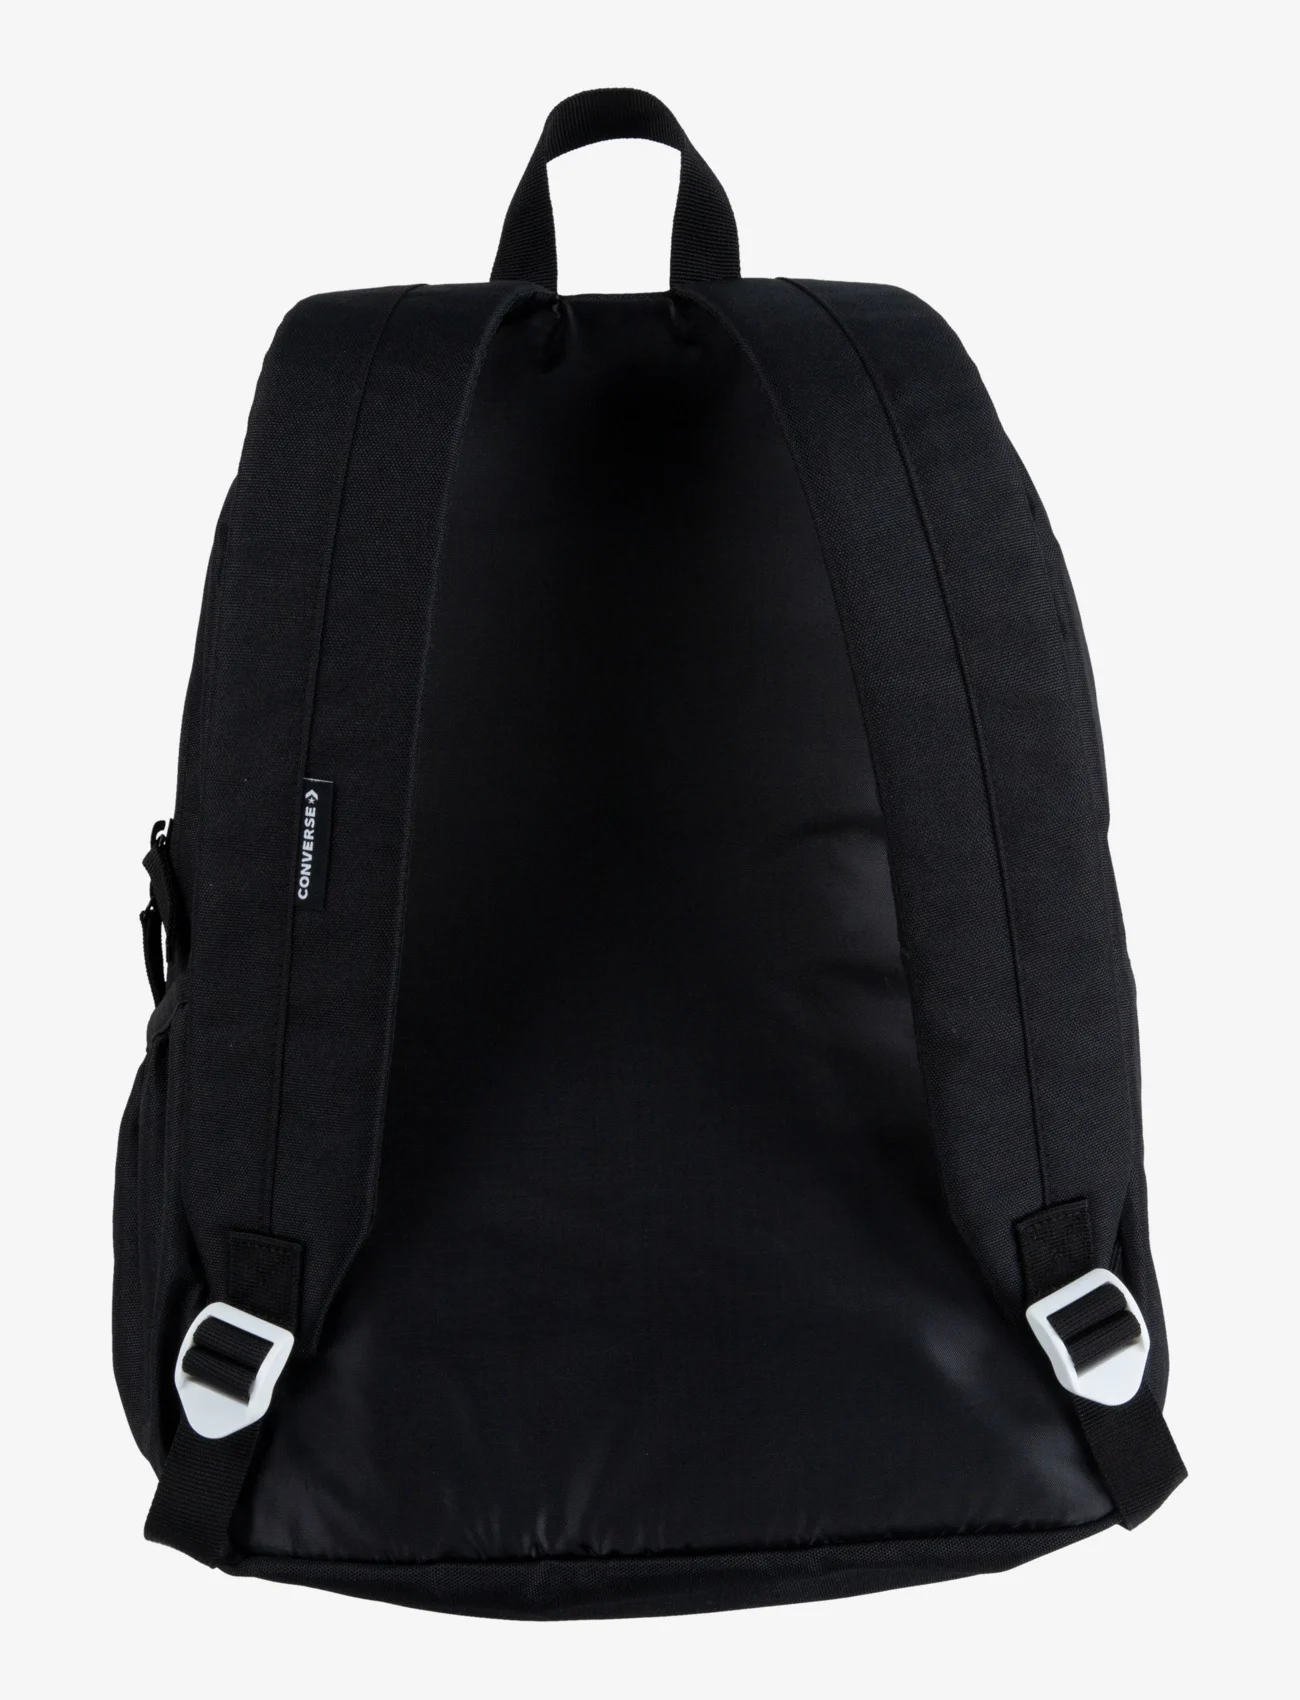 Converse - CAN CHUCK PATCH BACKPACK / CAN CHUCK PATCH BACKPACK - suvised sooduspakkumised - black - 1